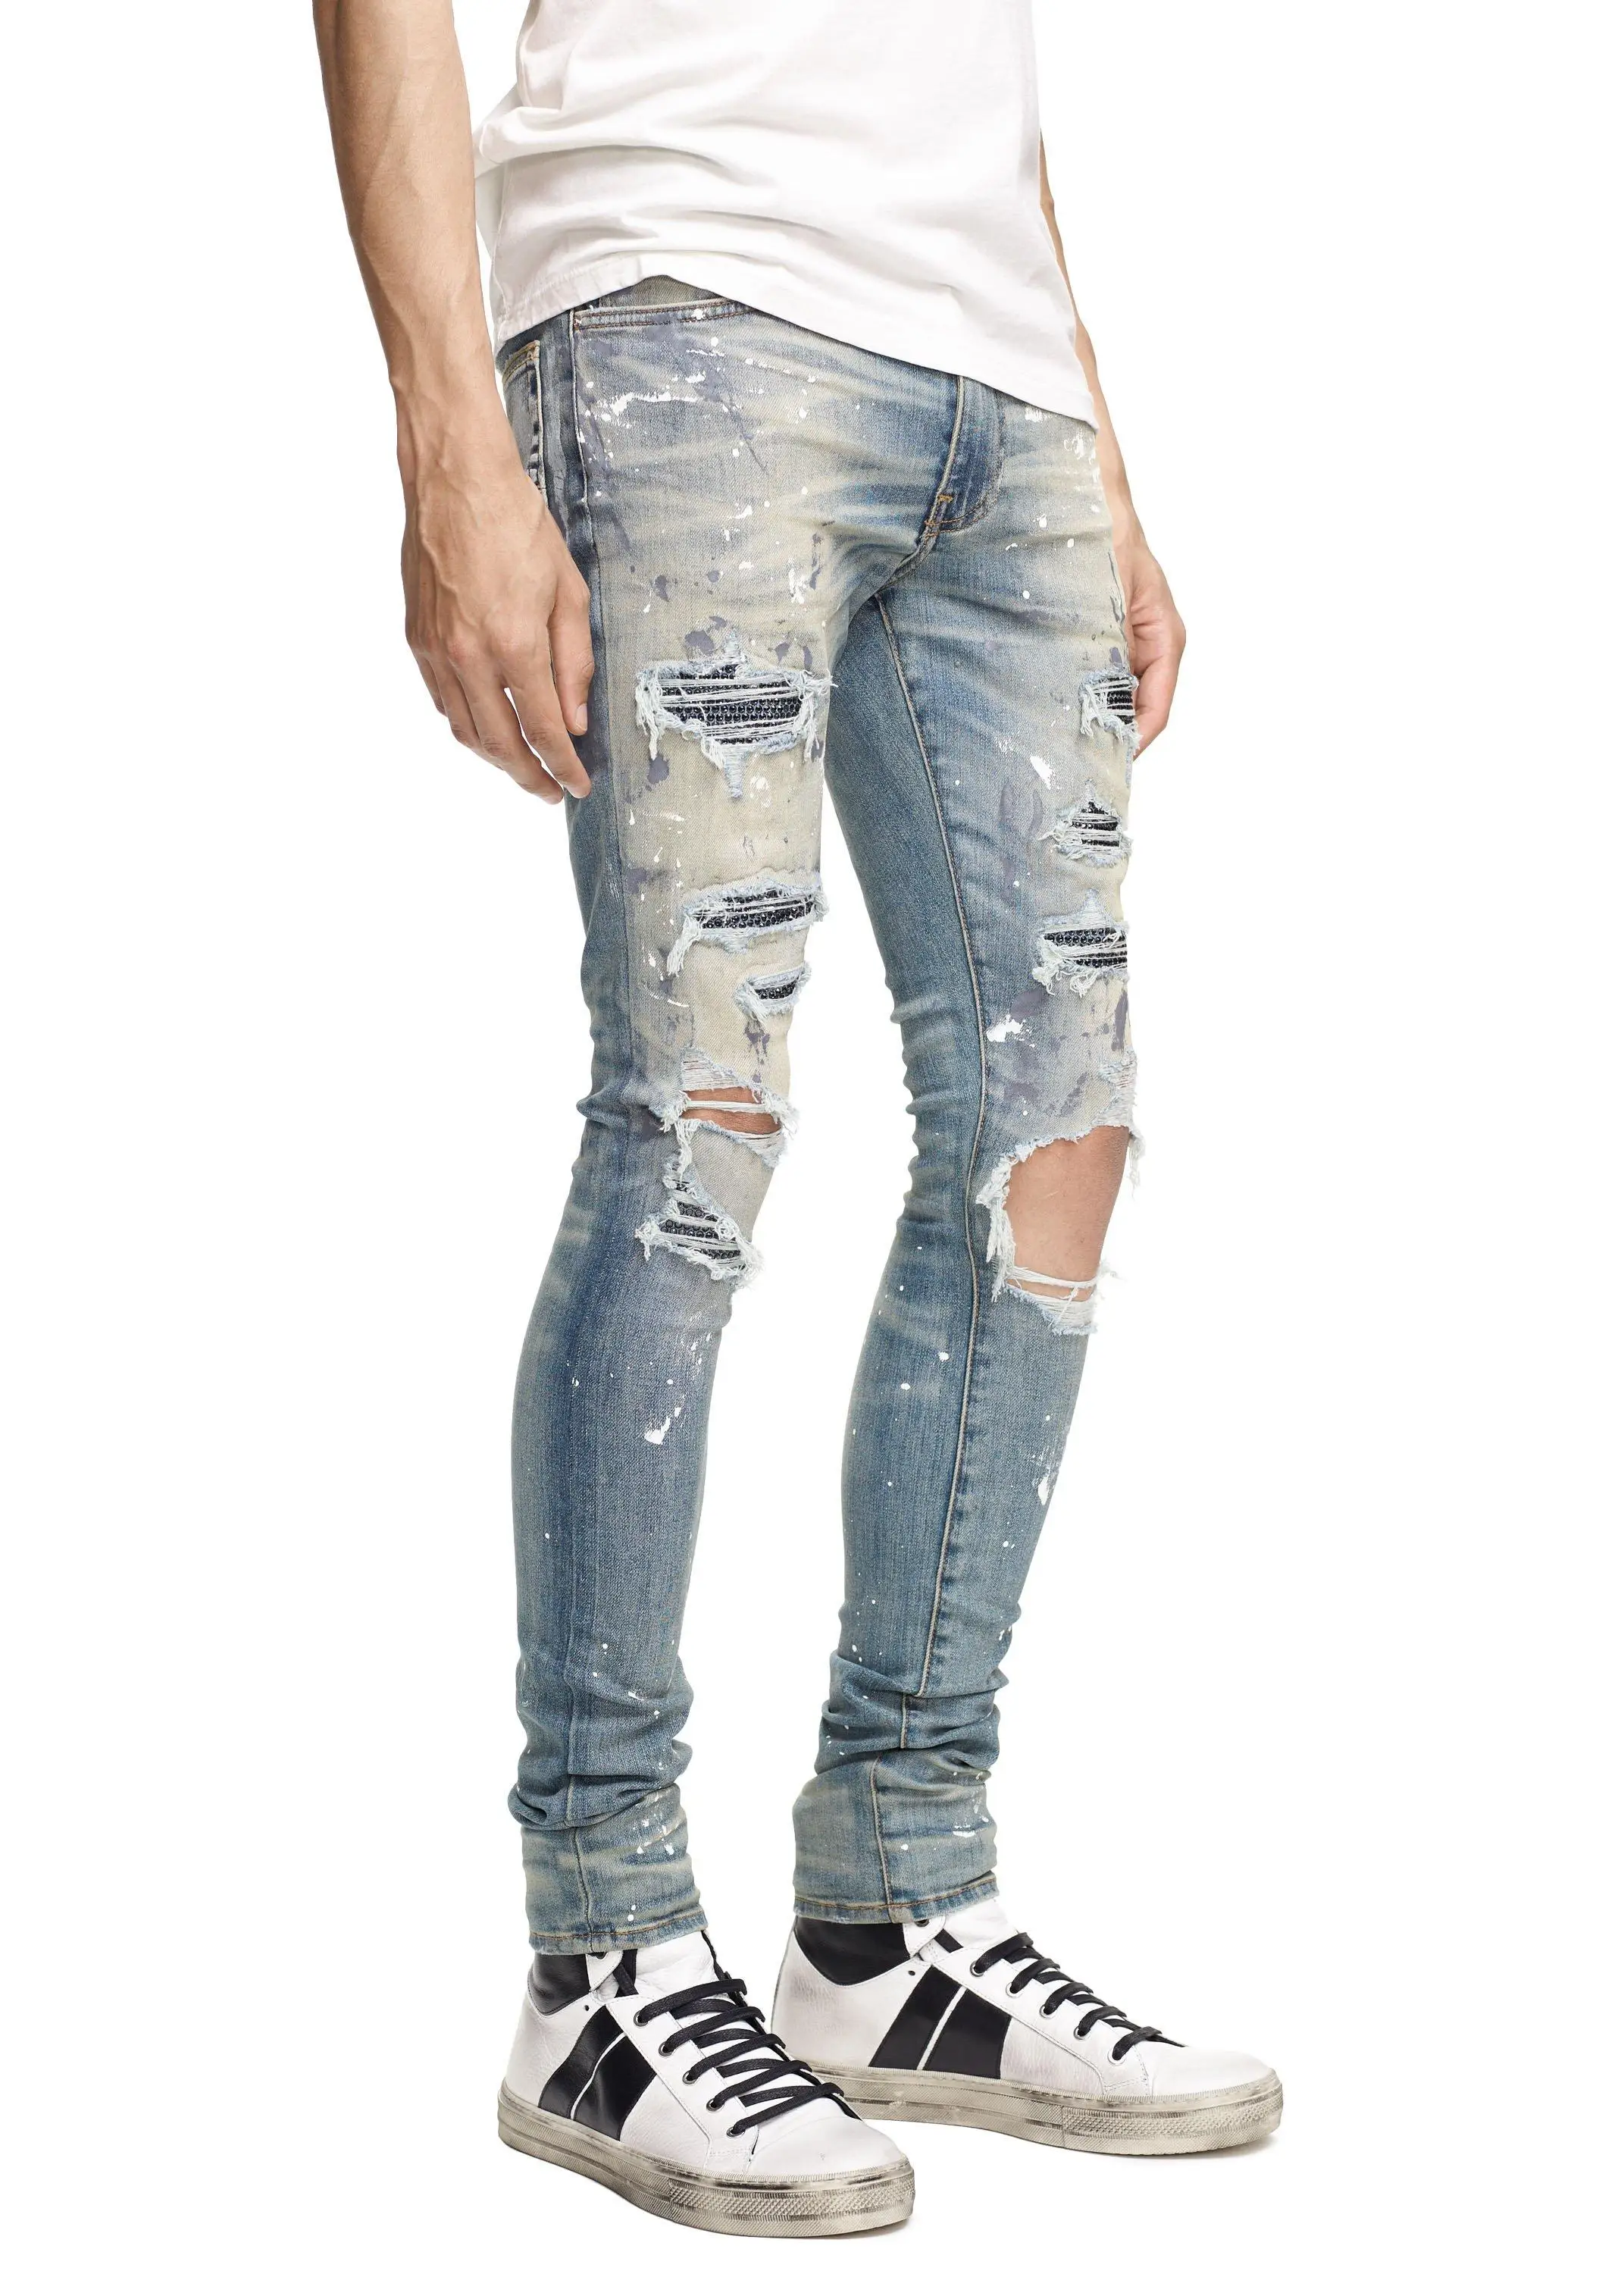 Diznew Classic Indigo Crystal Paint Distressed Jeans For Men - Buy ...